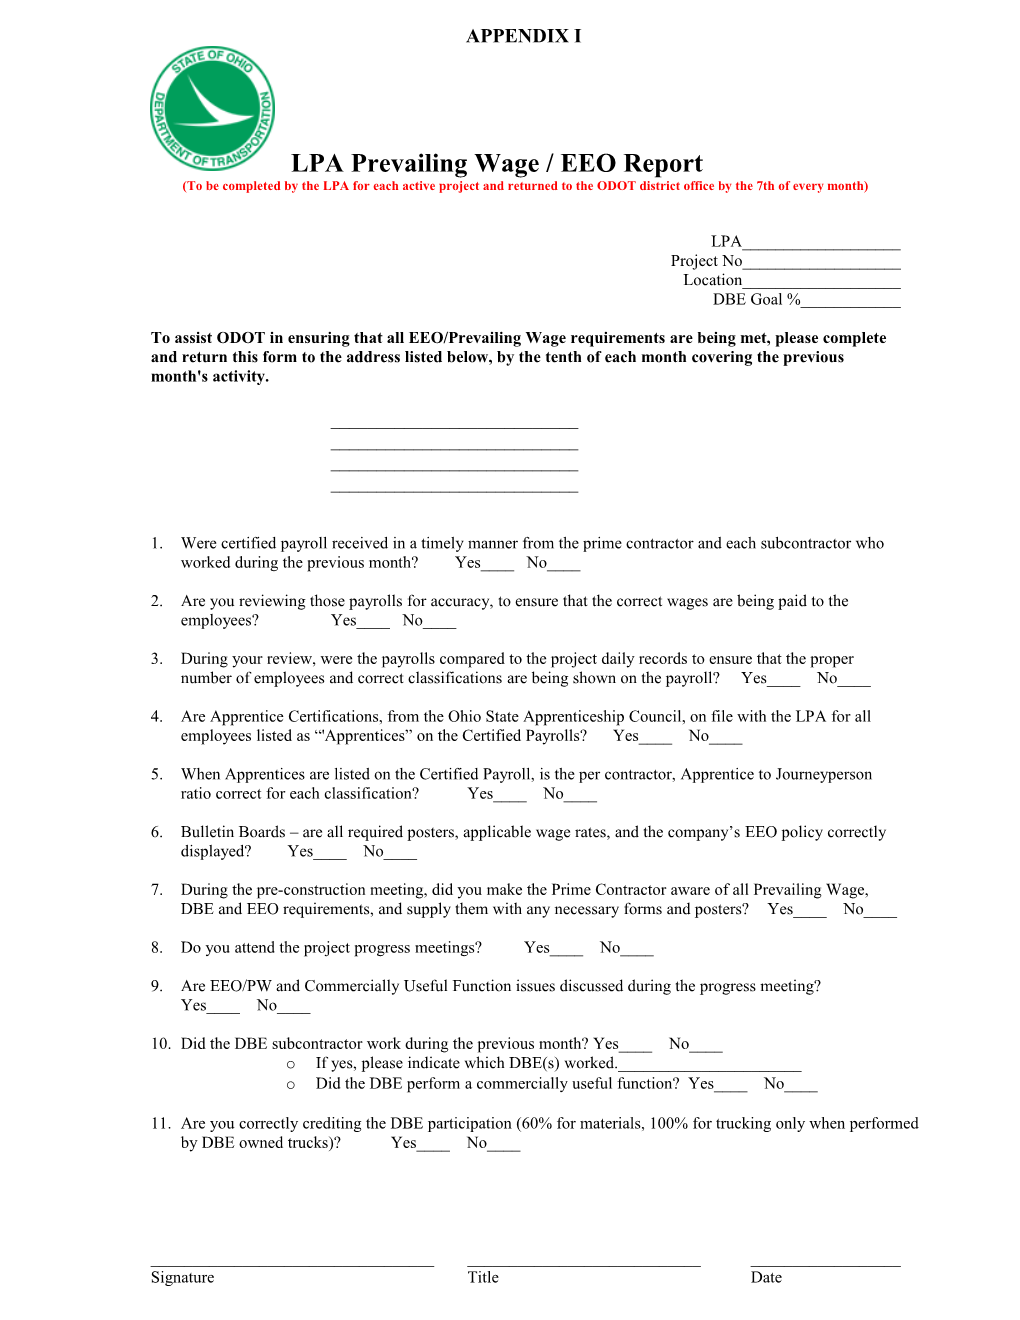 LPA EEO/Prevailing Wage Questionnaire